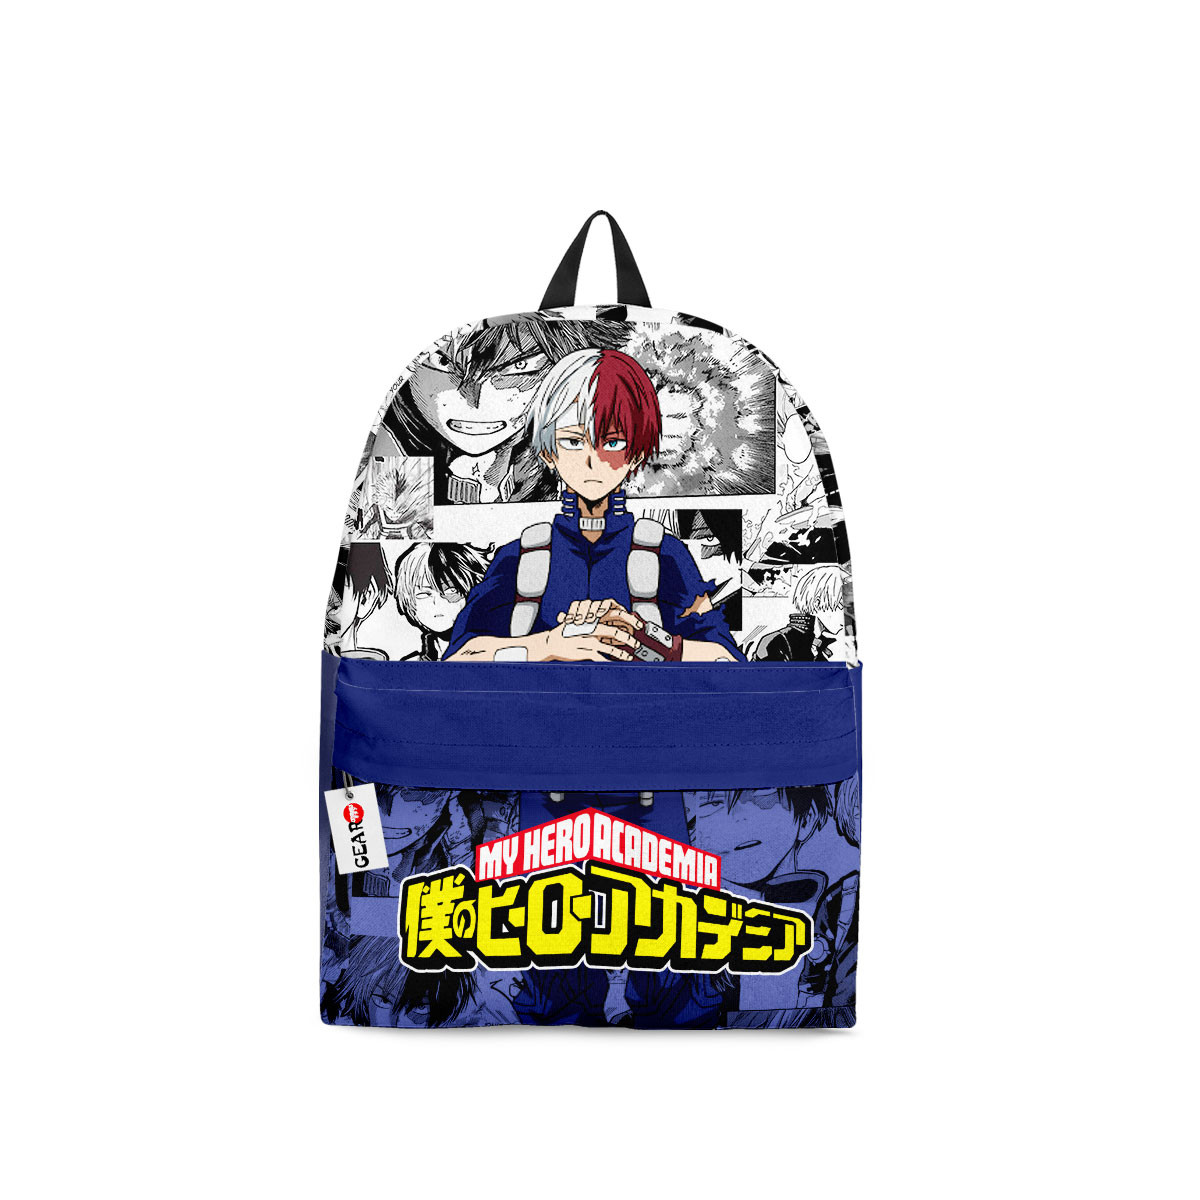 Latest Anime style products 249